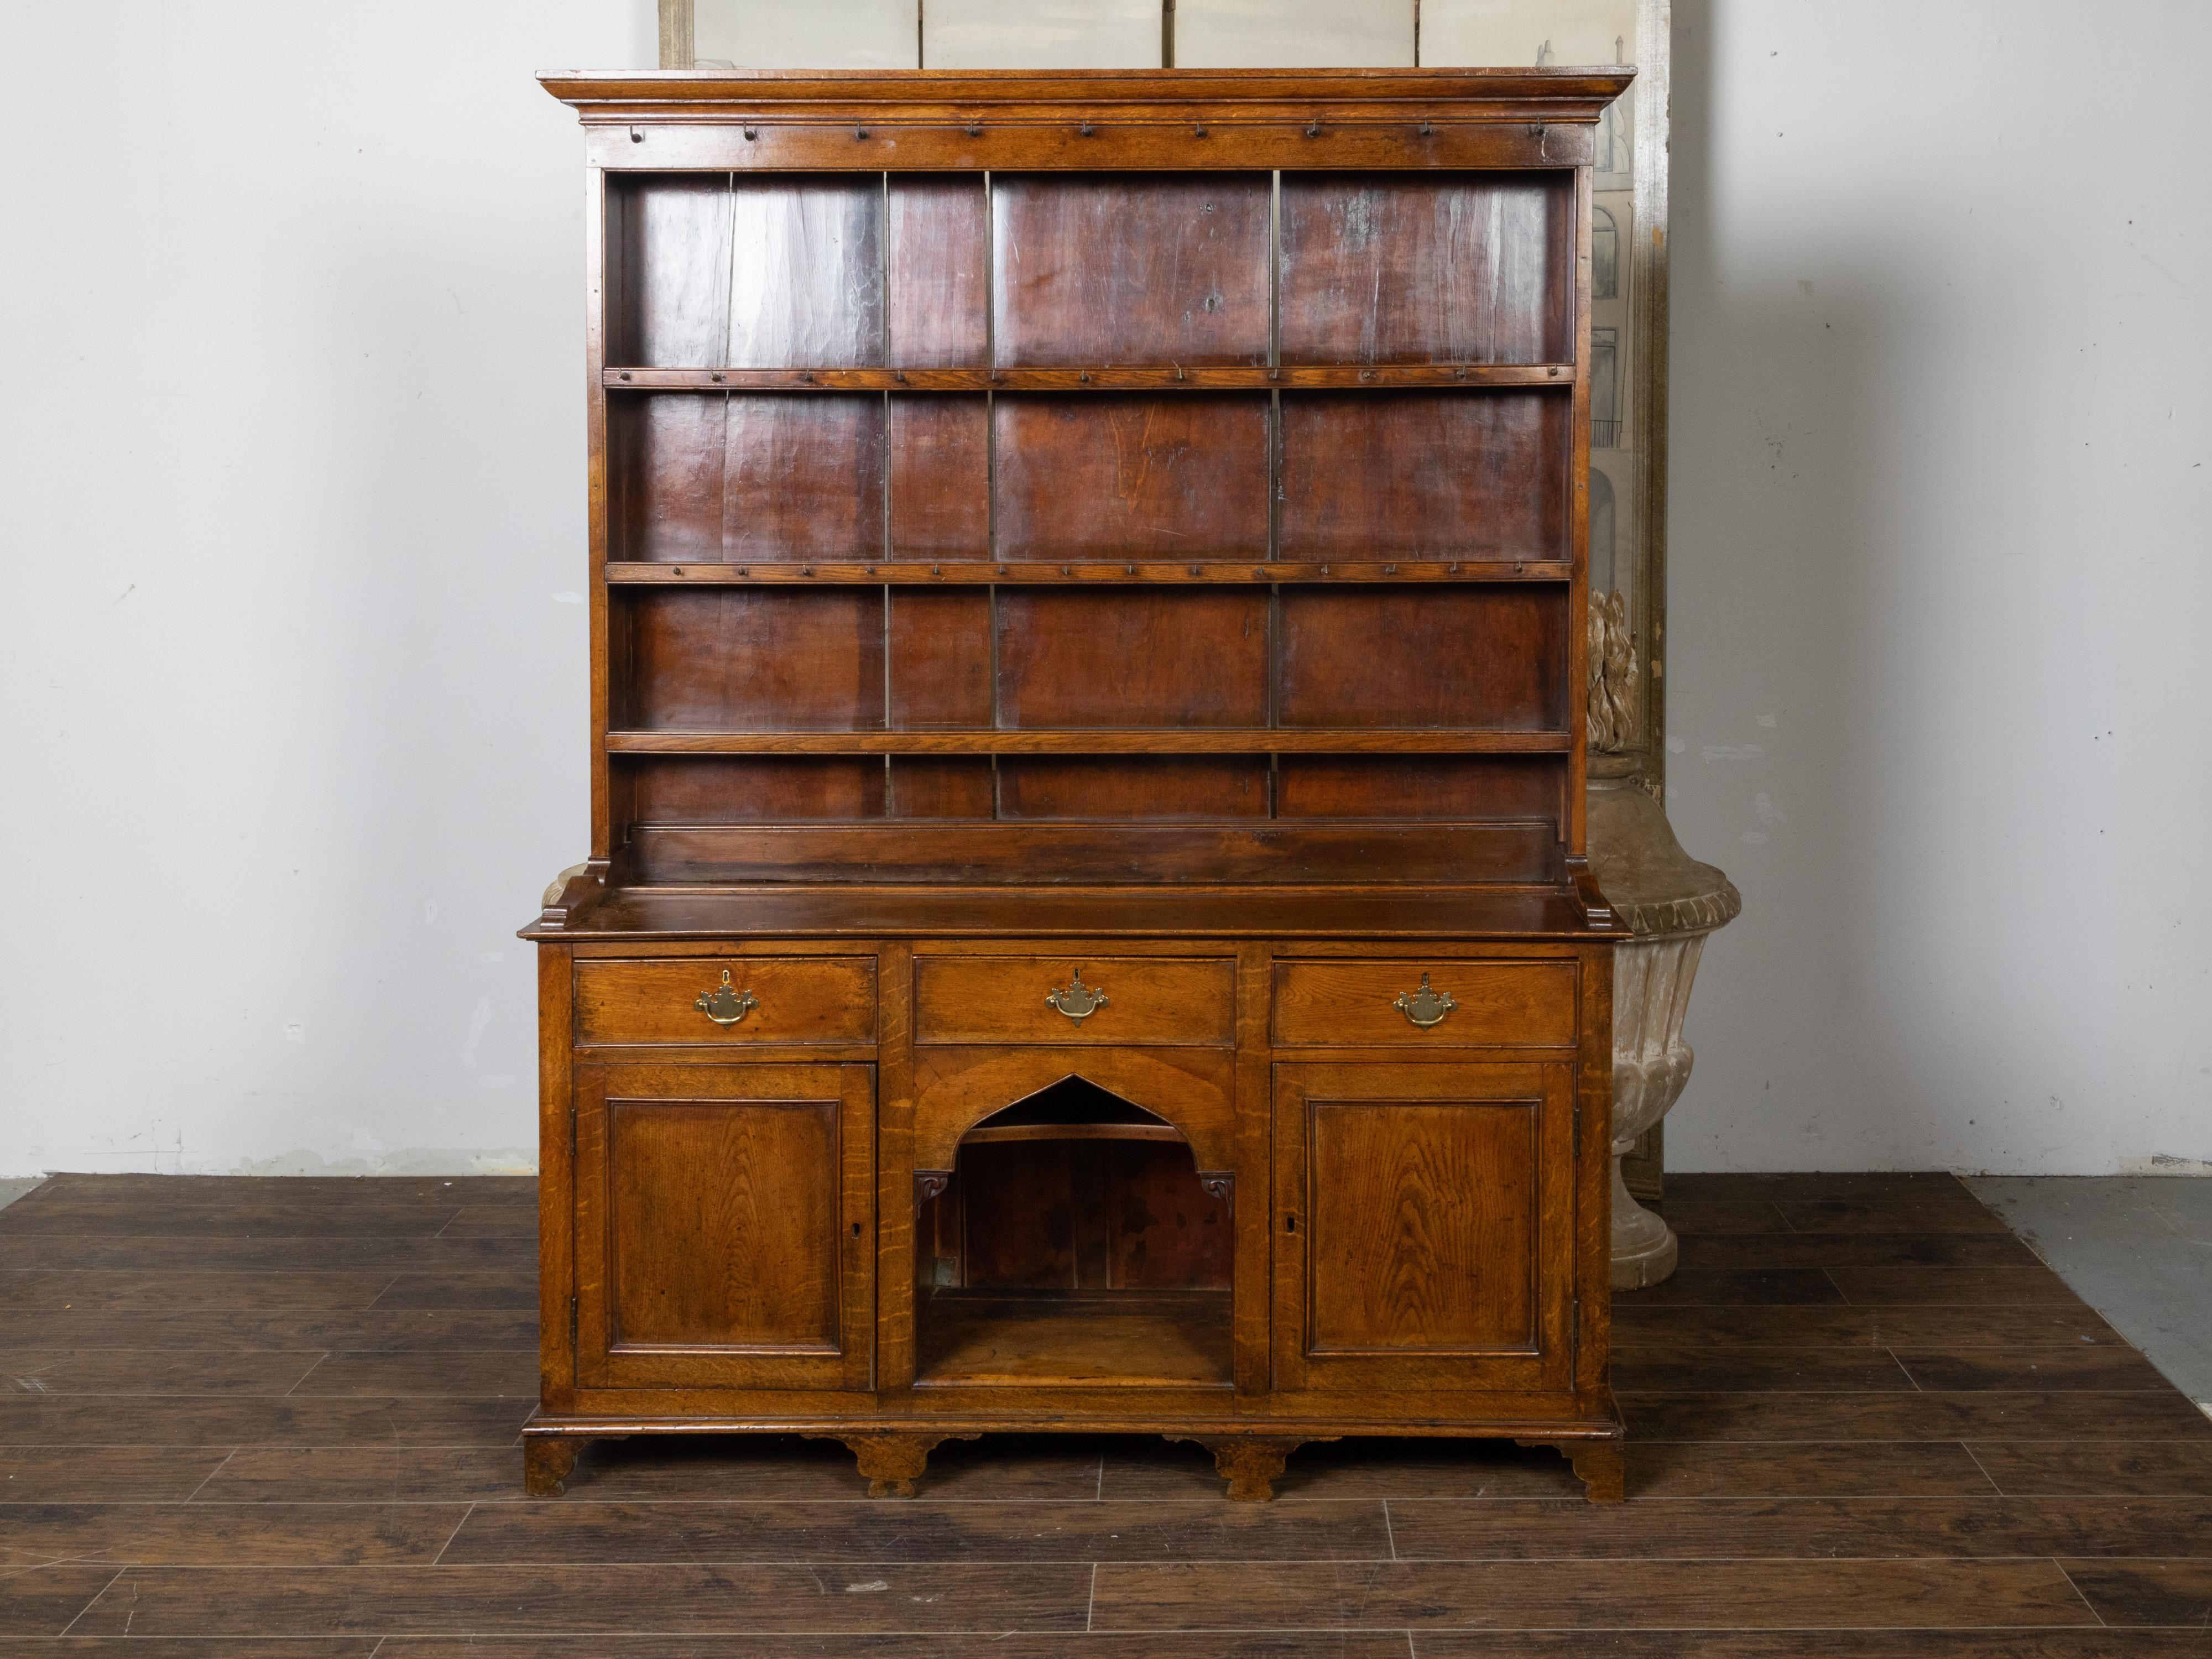 An English oak Welsh dresser from the 19th century, with open shelves, petite hooks and low sideboard with two doors, three drawers, carved arch and Chippendale style hardware. Created in England during the 19th century, this oak Welsh dresser